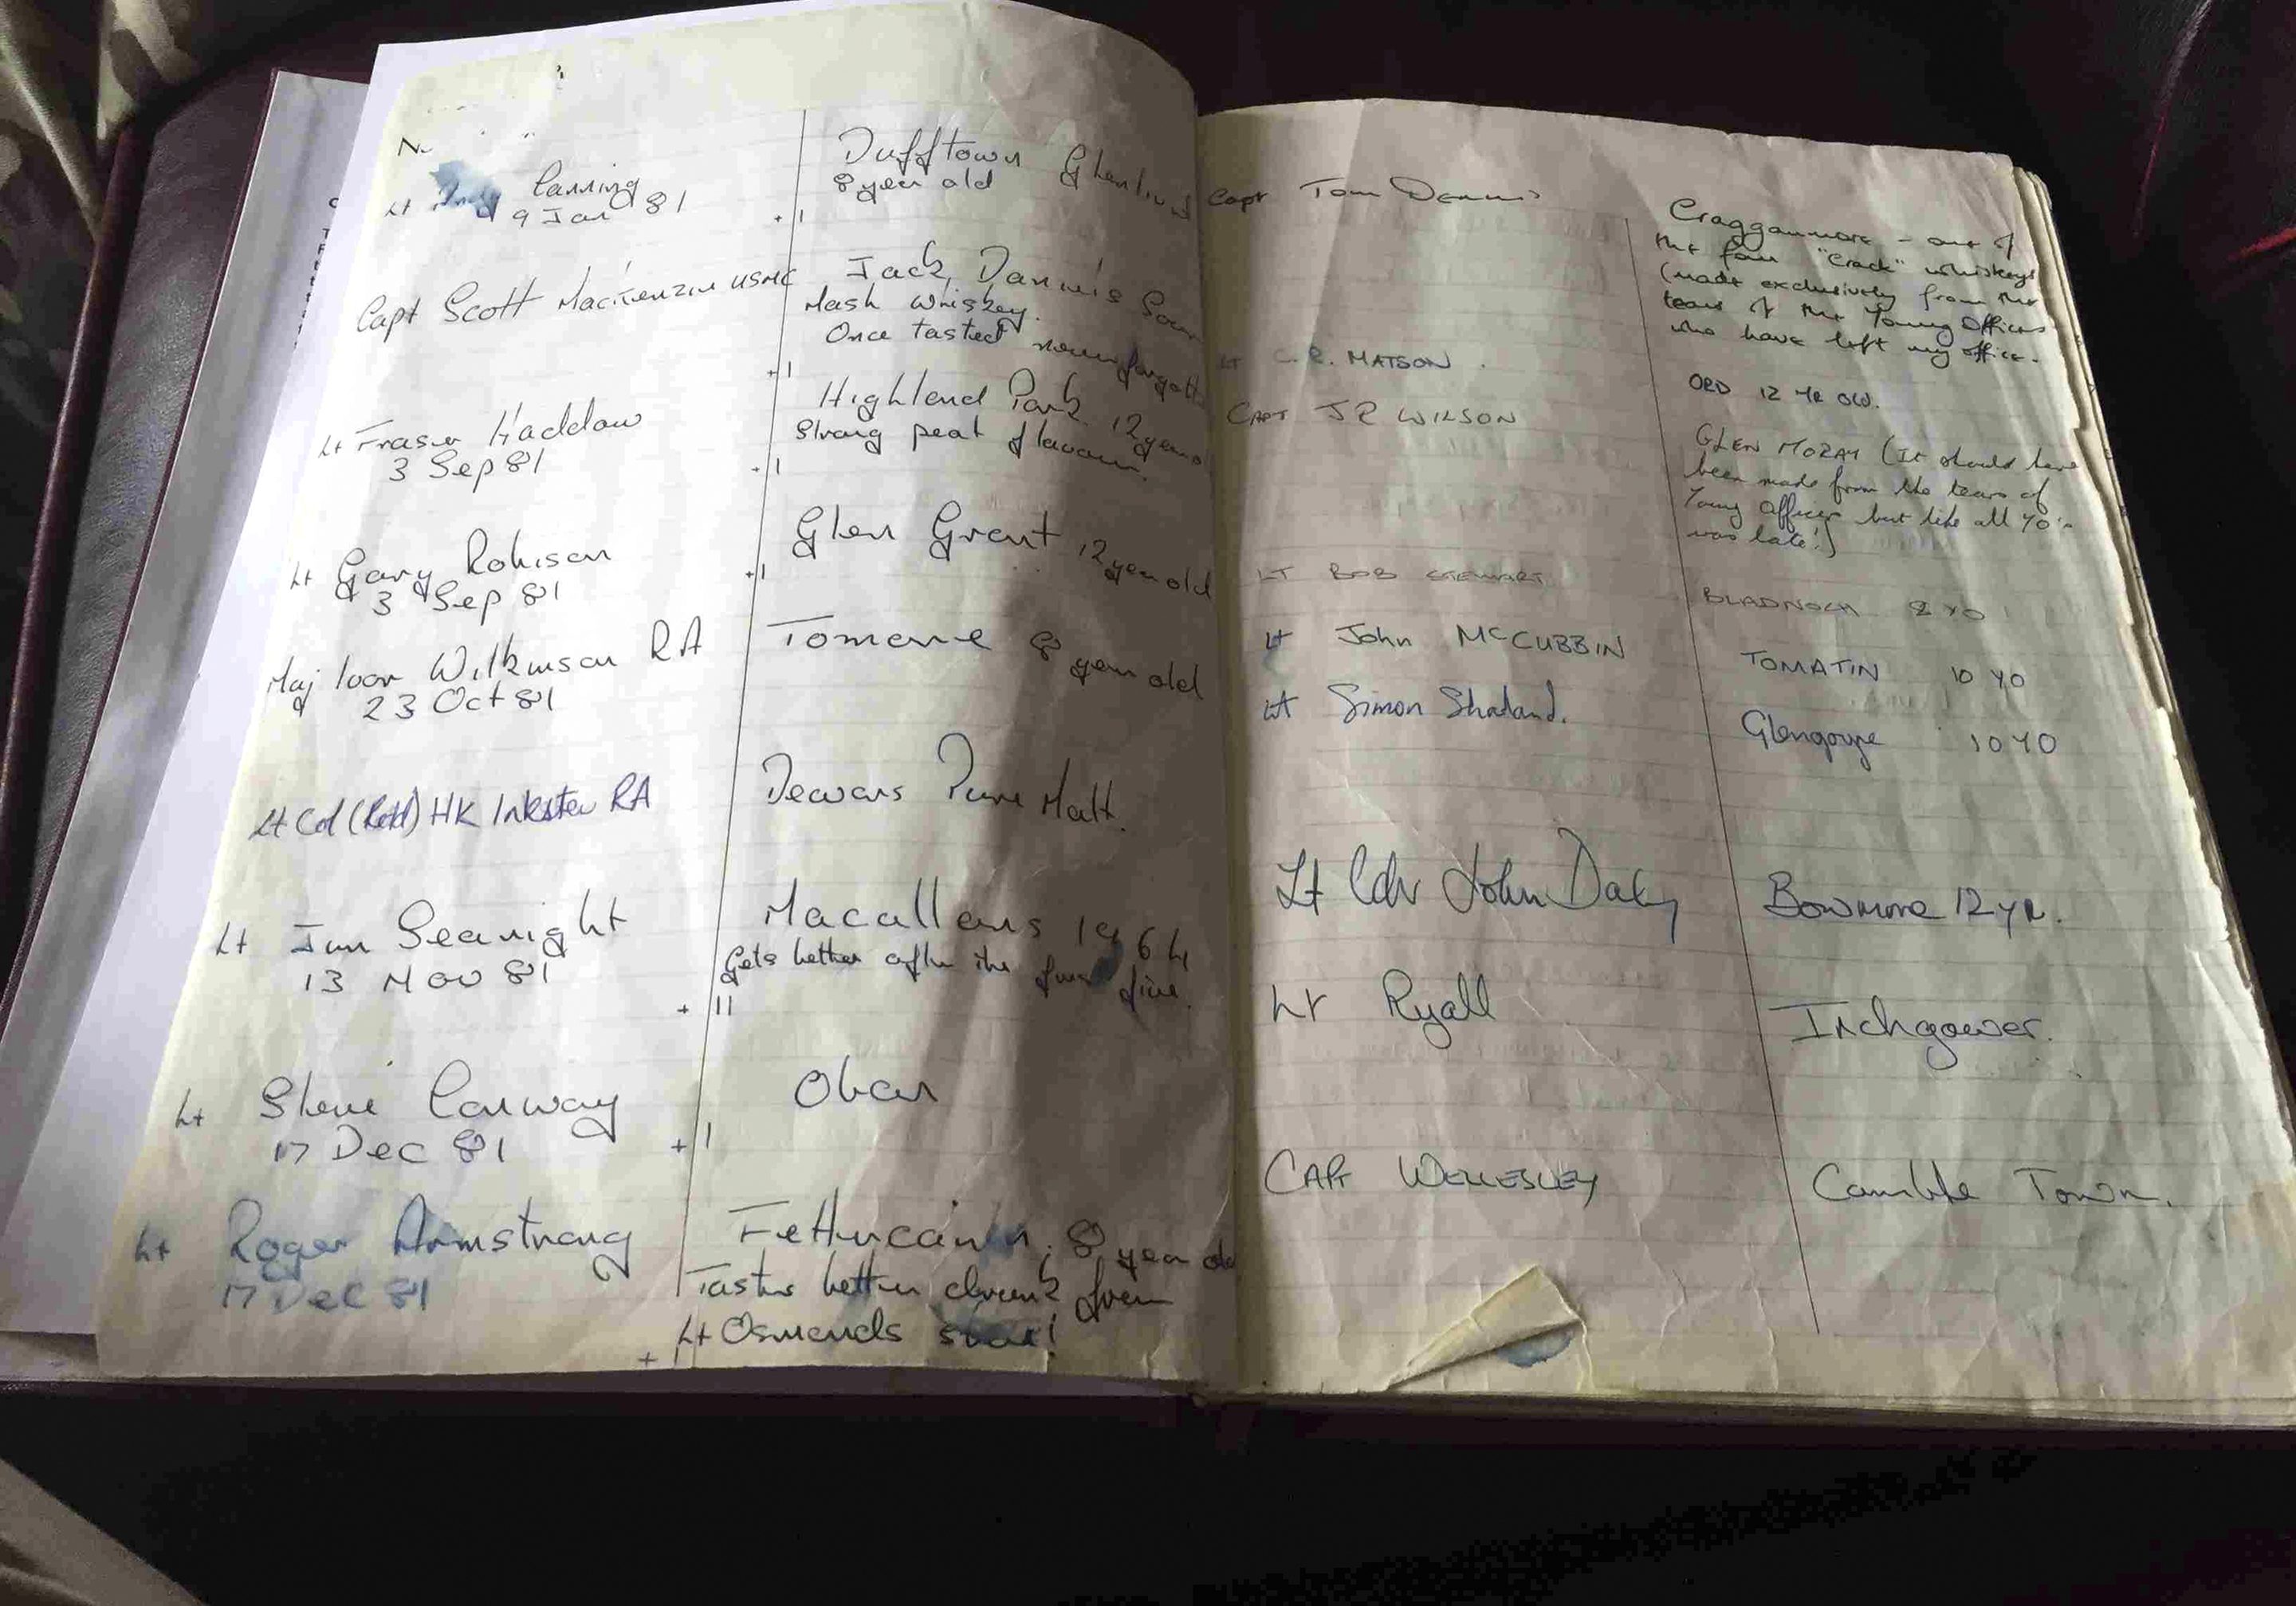 45 Commando's whisky book, listing all of the donations it has received from departing officers
